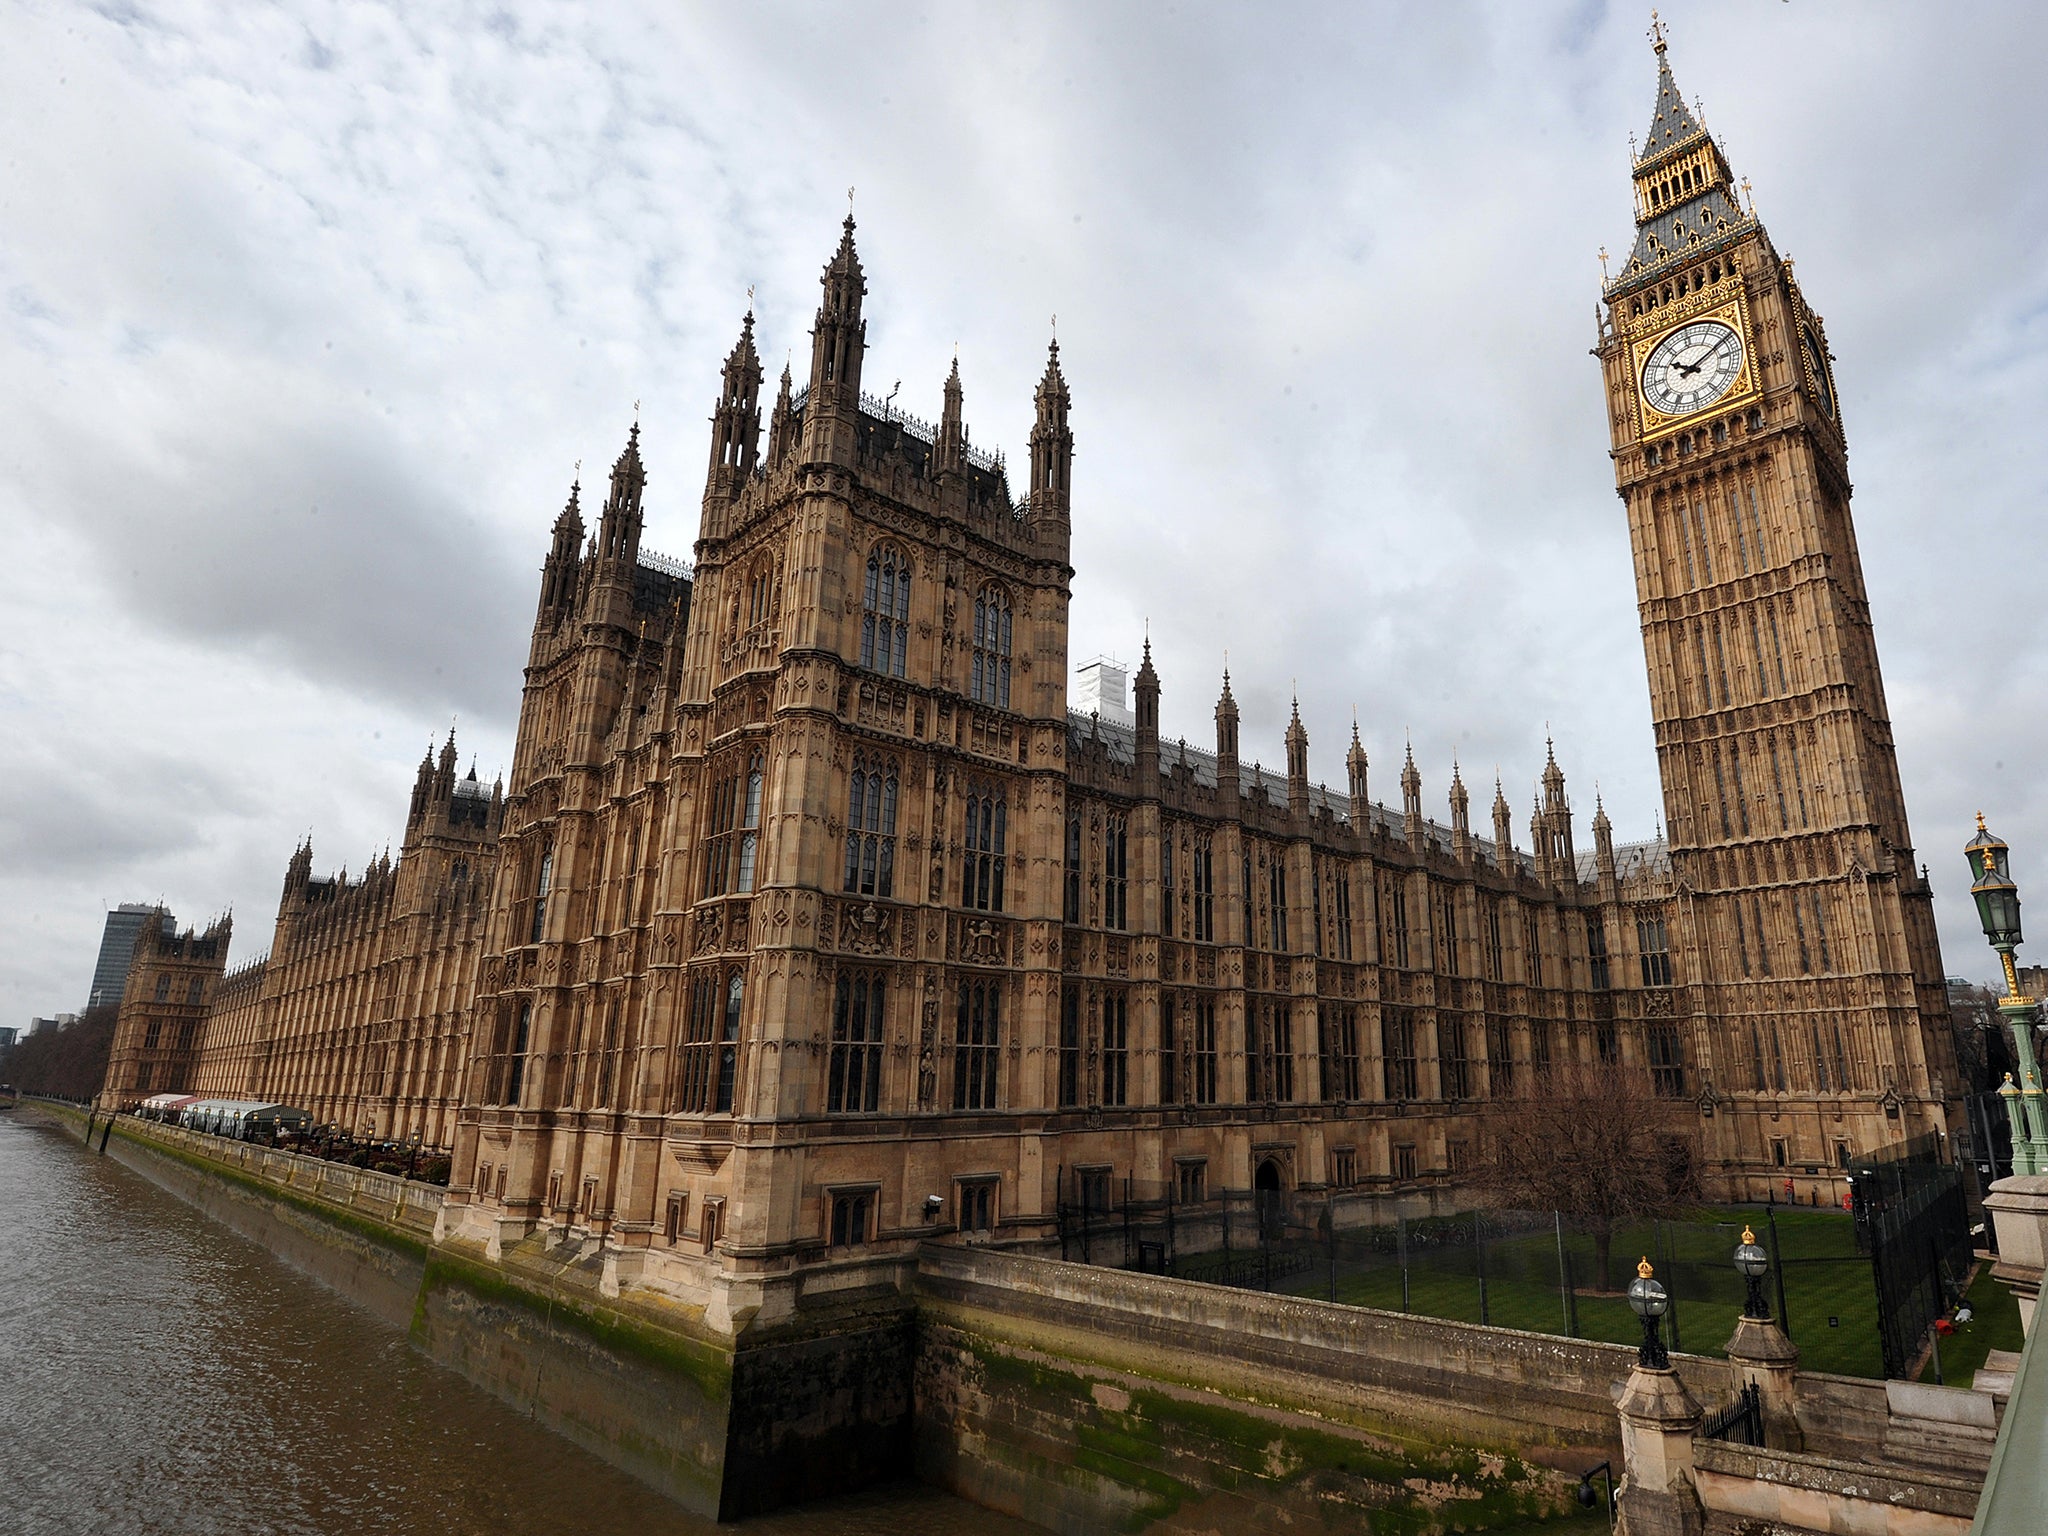 MPs have vowed to toughen up a bill to give constituents more power to get rid of their constituency MP